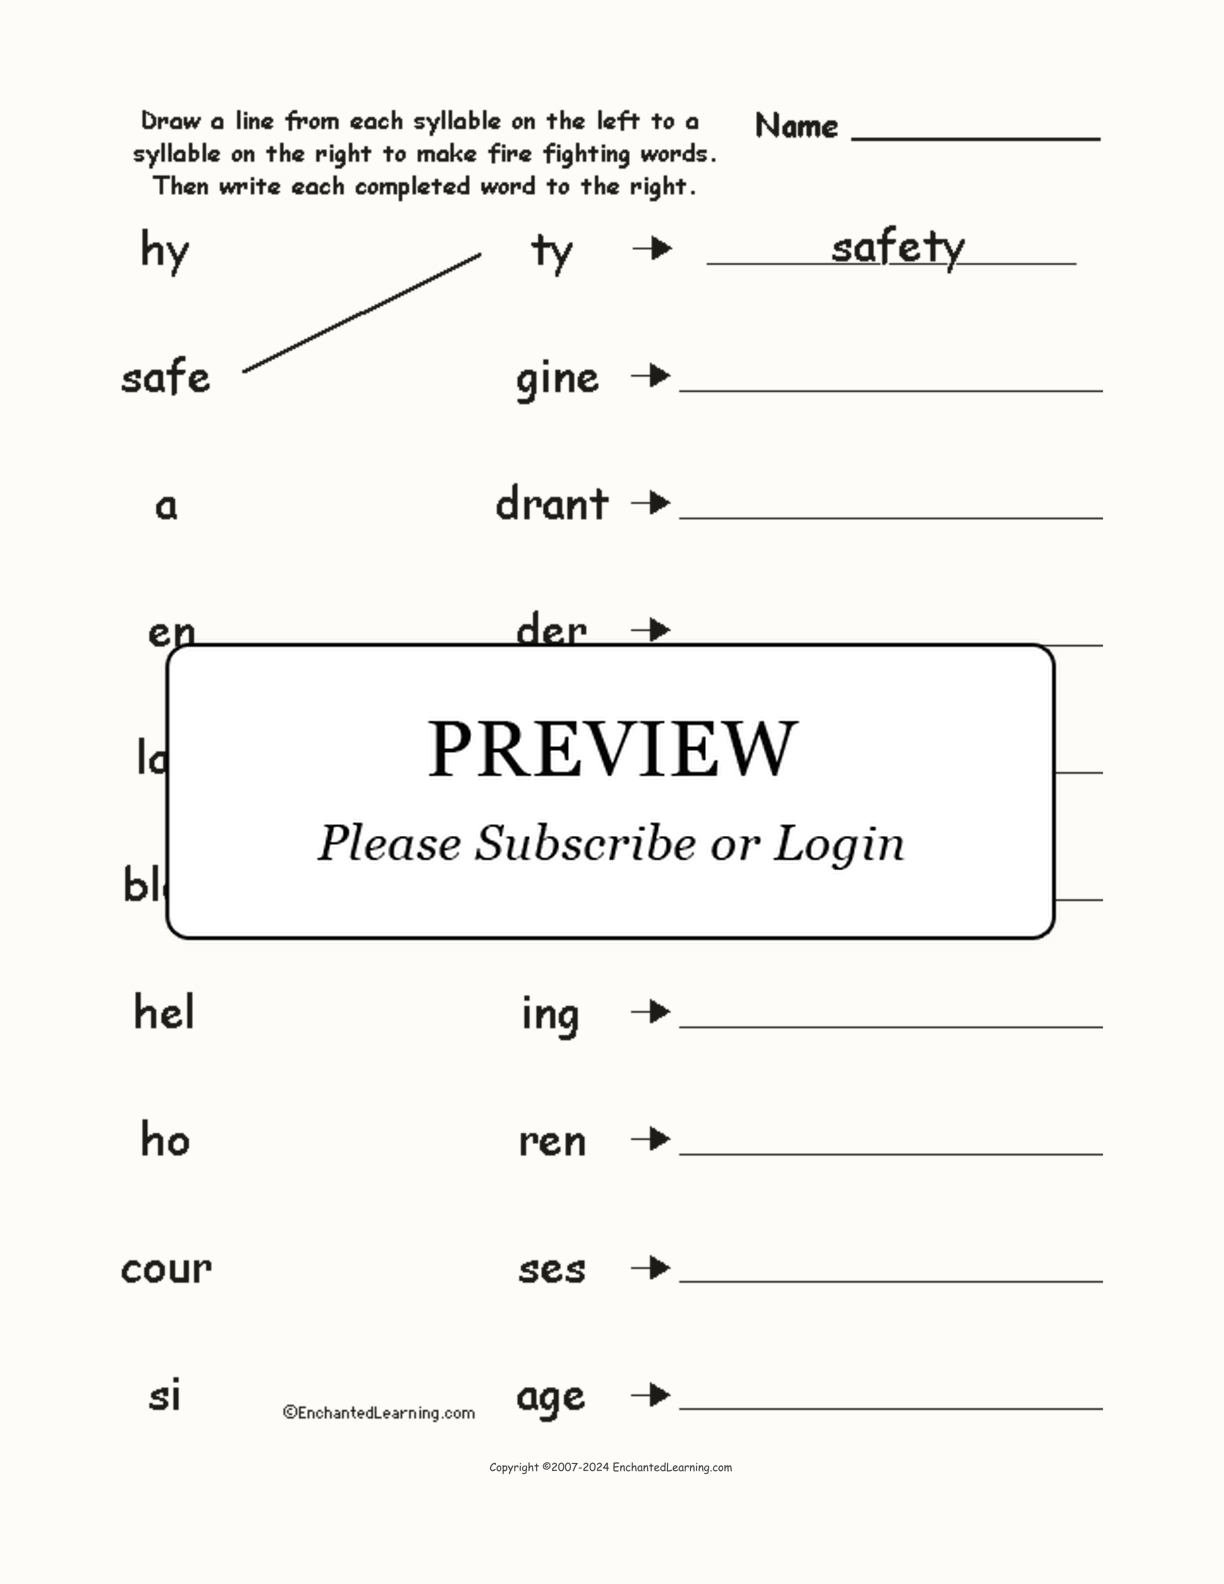 Match the Syllables: Fire Fighting Words interactive worksheet page 1